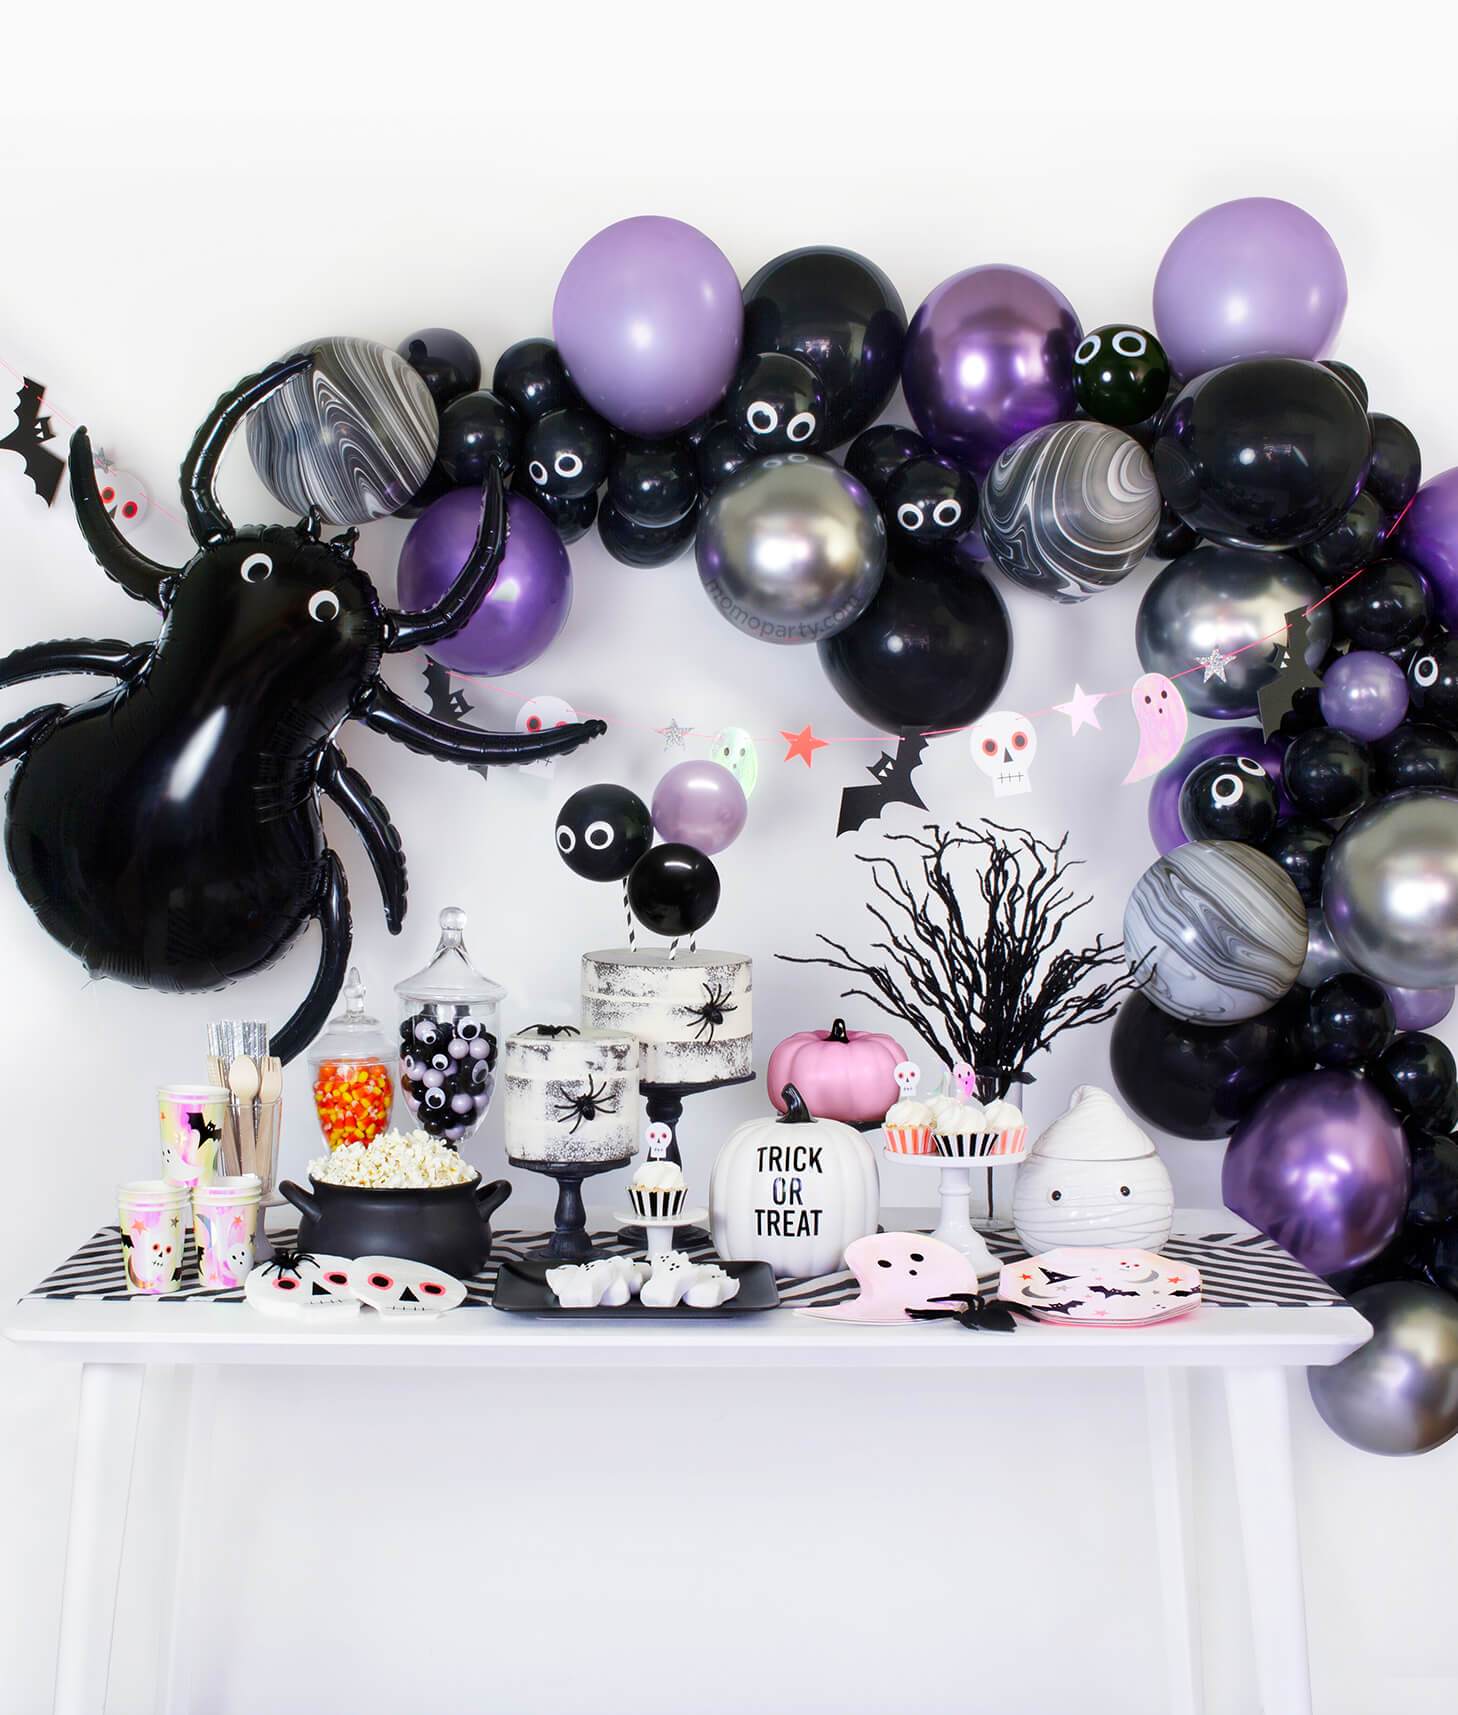 Momo Party Halloween party collection table set up with black, purple chrome and silver color balloon garland, black spider foil balloon decoration 